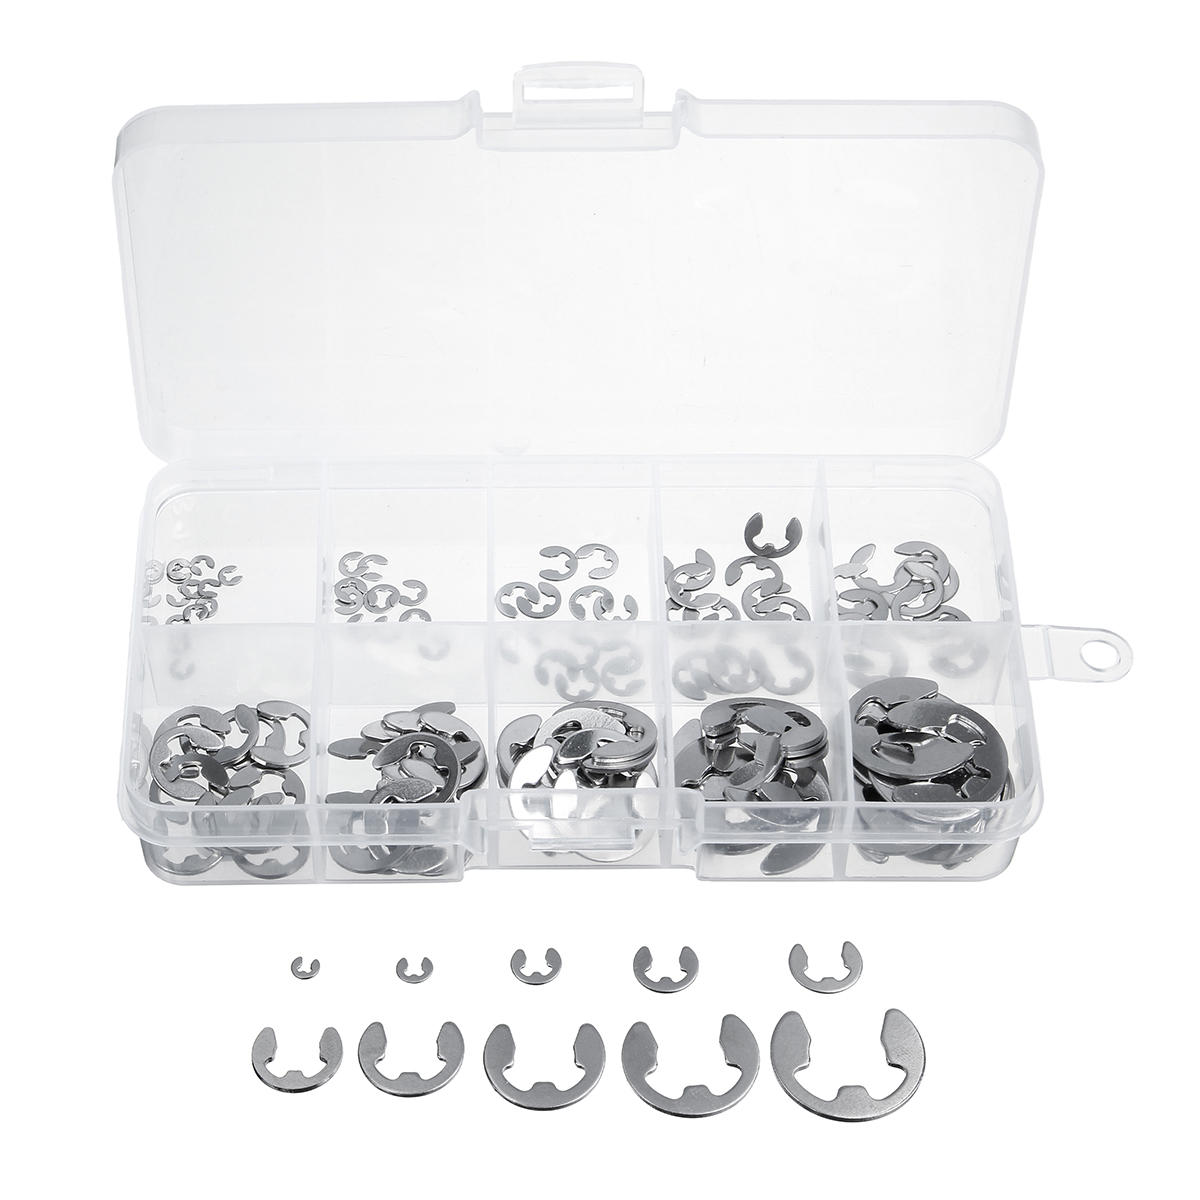 

120PCS Stainless Steel E-Clip Snap Ring Assortment Kit Retaining Circlip HandWare Tools 1.5 2 3 4 5 6 7 8 9 10 mm